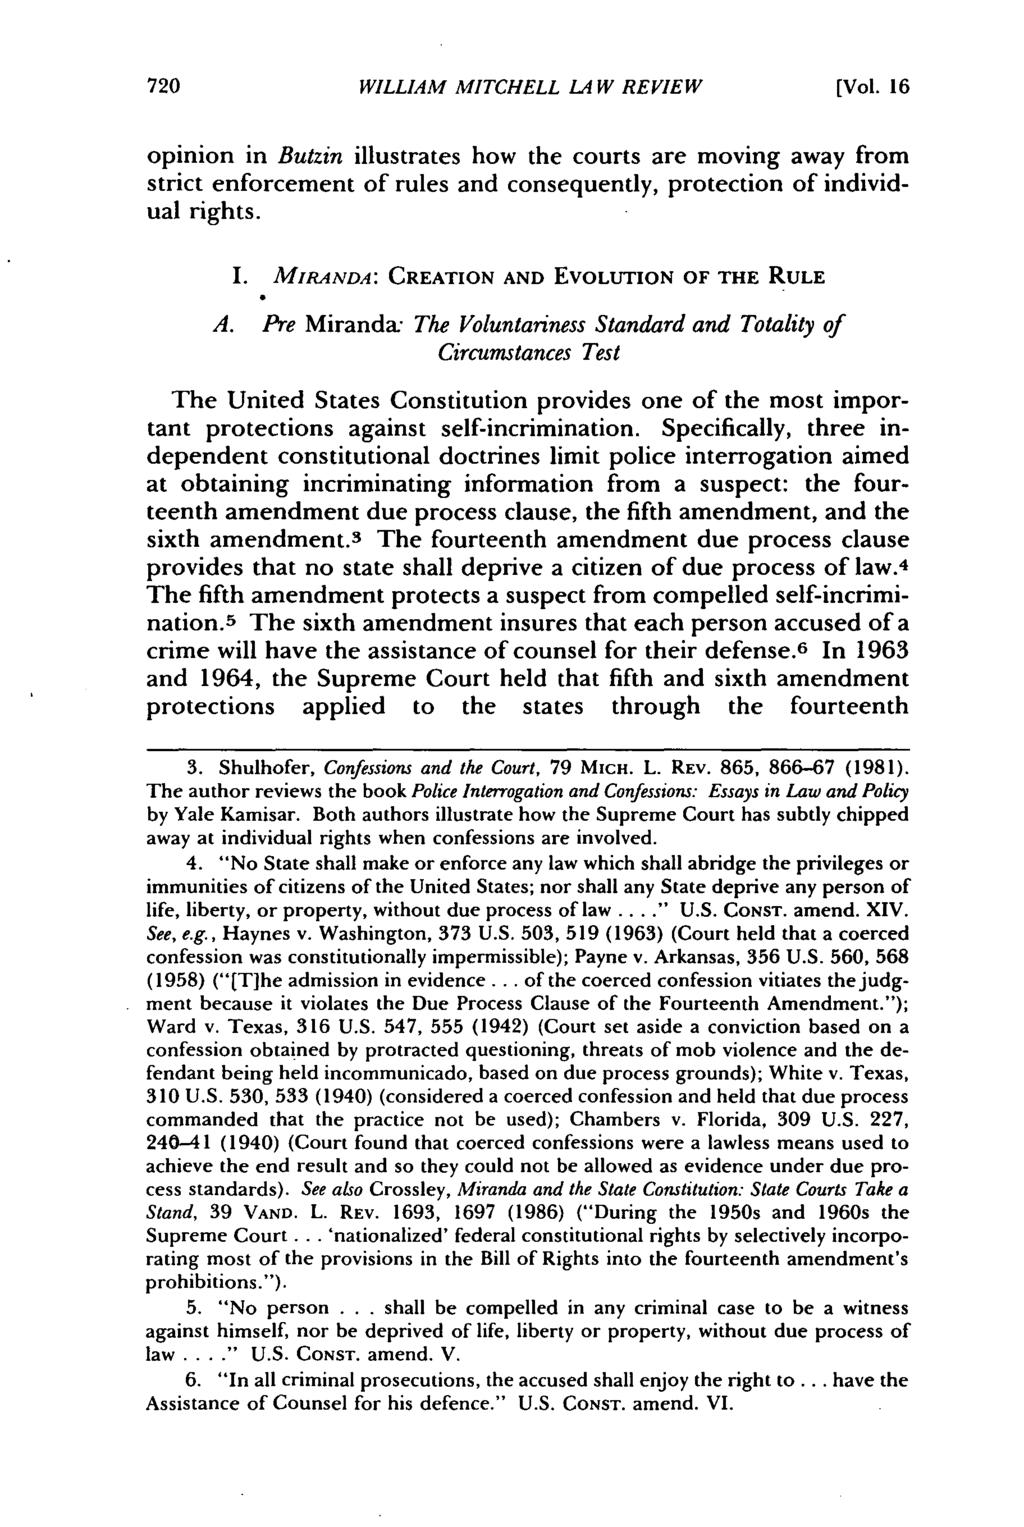 William Mitchell Law Review, Vol. 16, Iss. 3 [1990], Art. 7 WILLIAM MITCHELL LA W REVIEW [Vol.